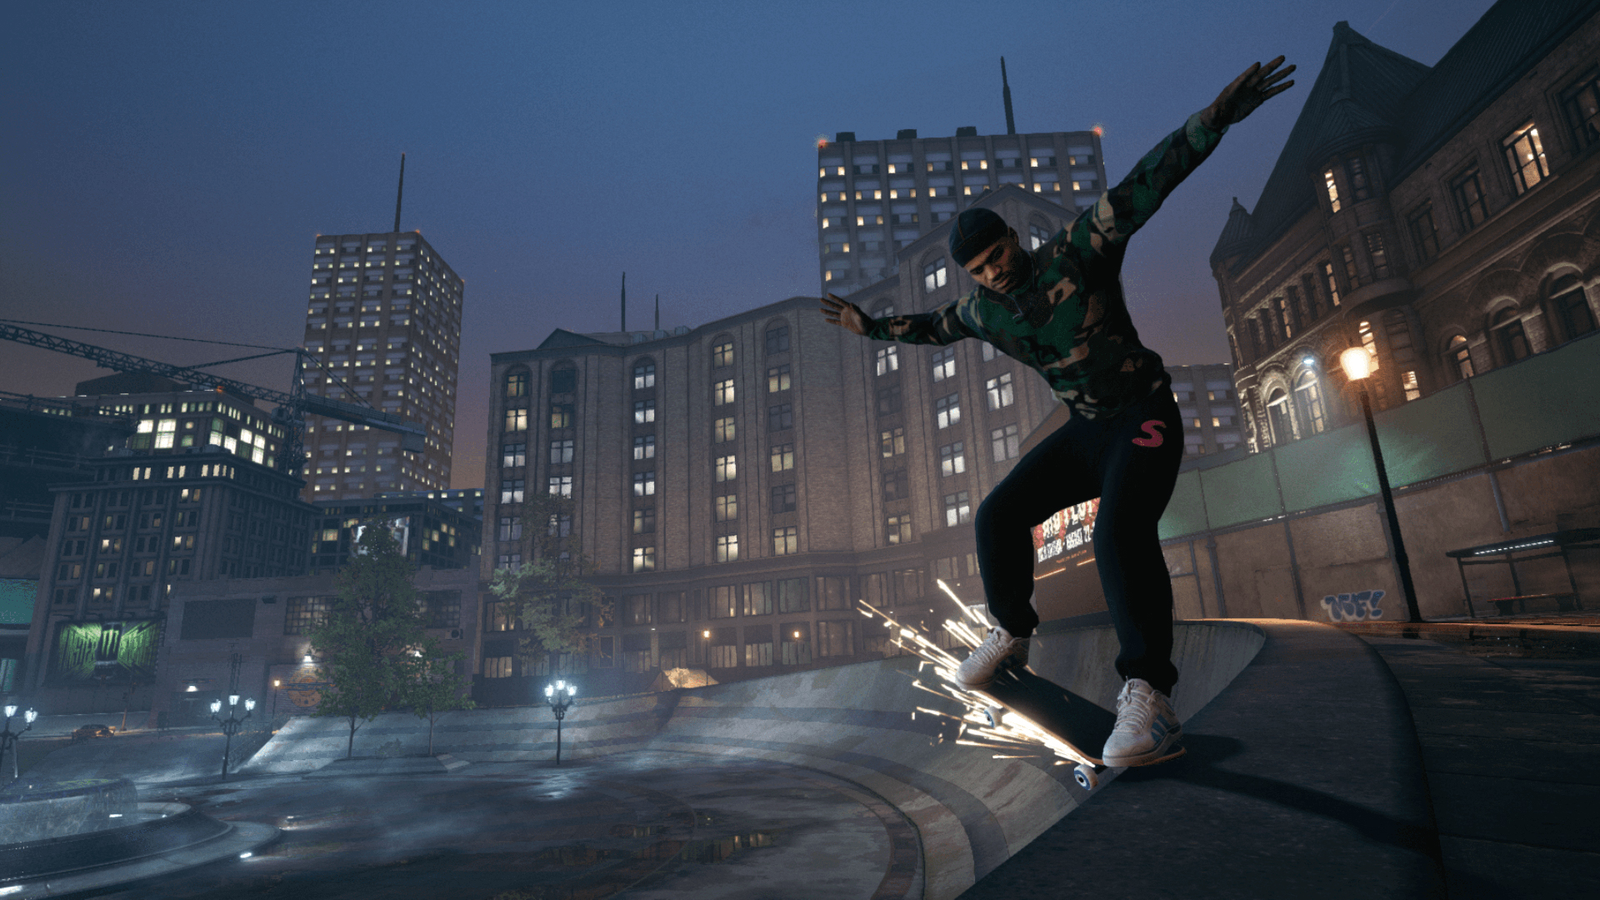 Tony Hawk's Pro Skater 1 + 2 News and Guides